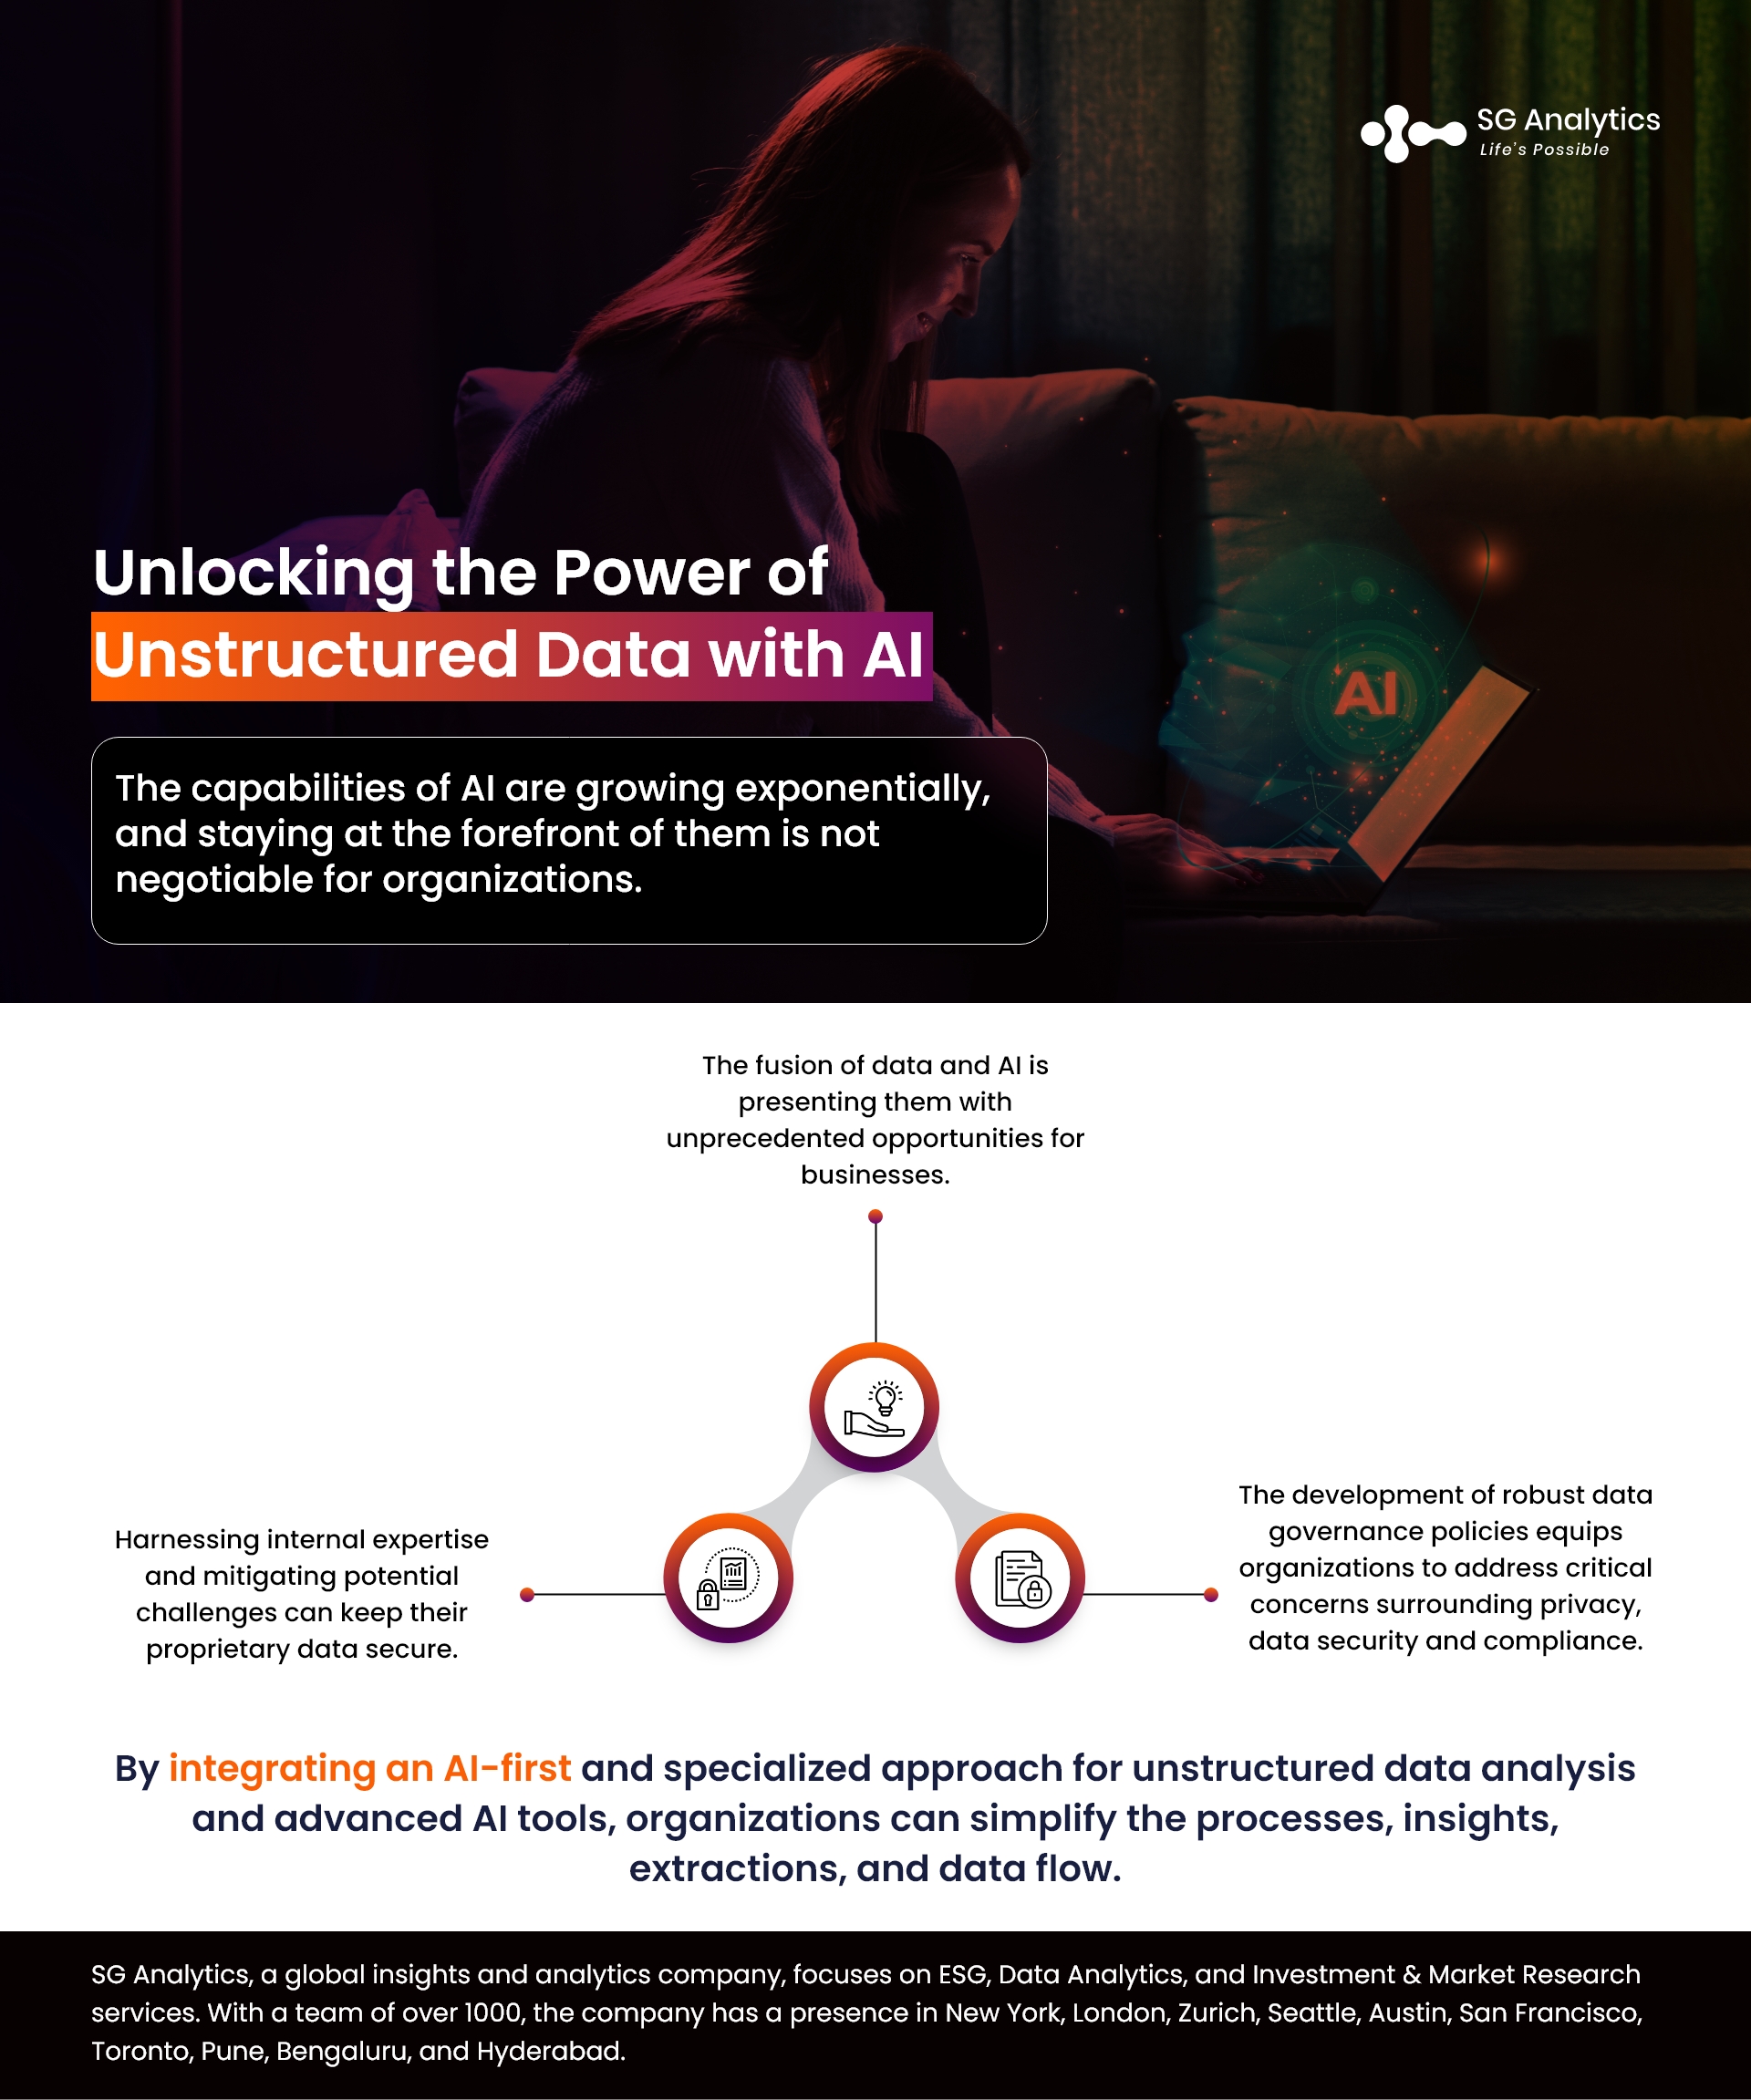 Unlocking the Power of Unstructured Data with AI